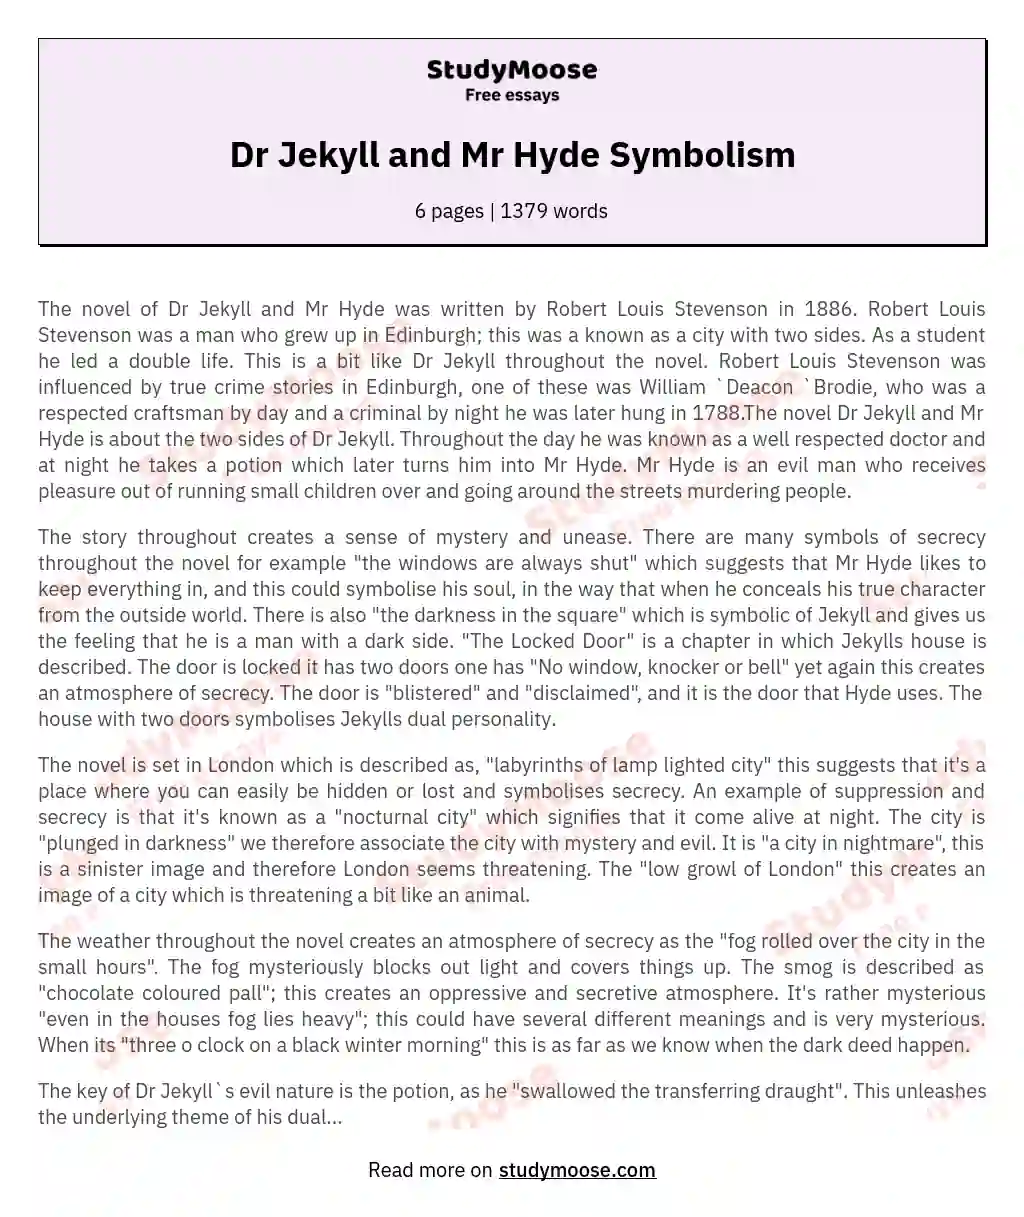 Dr Jekyll and Mr Hyde Symbolism